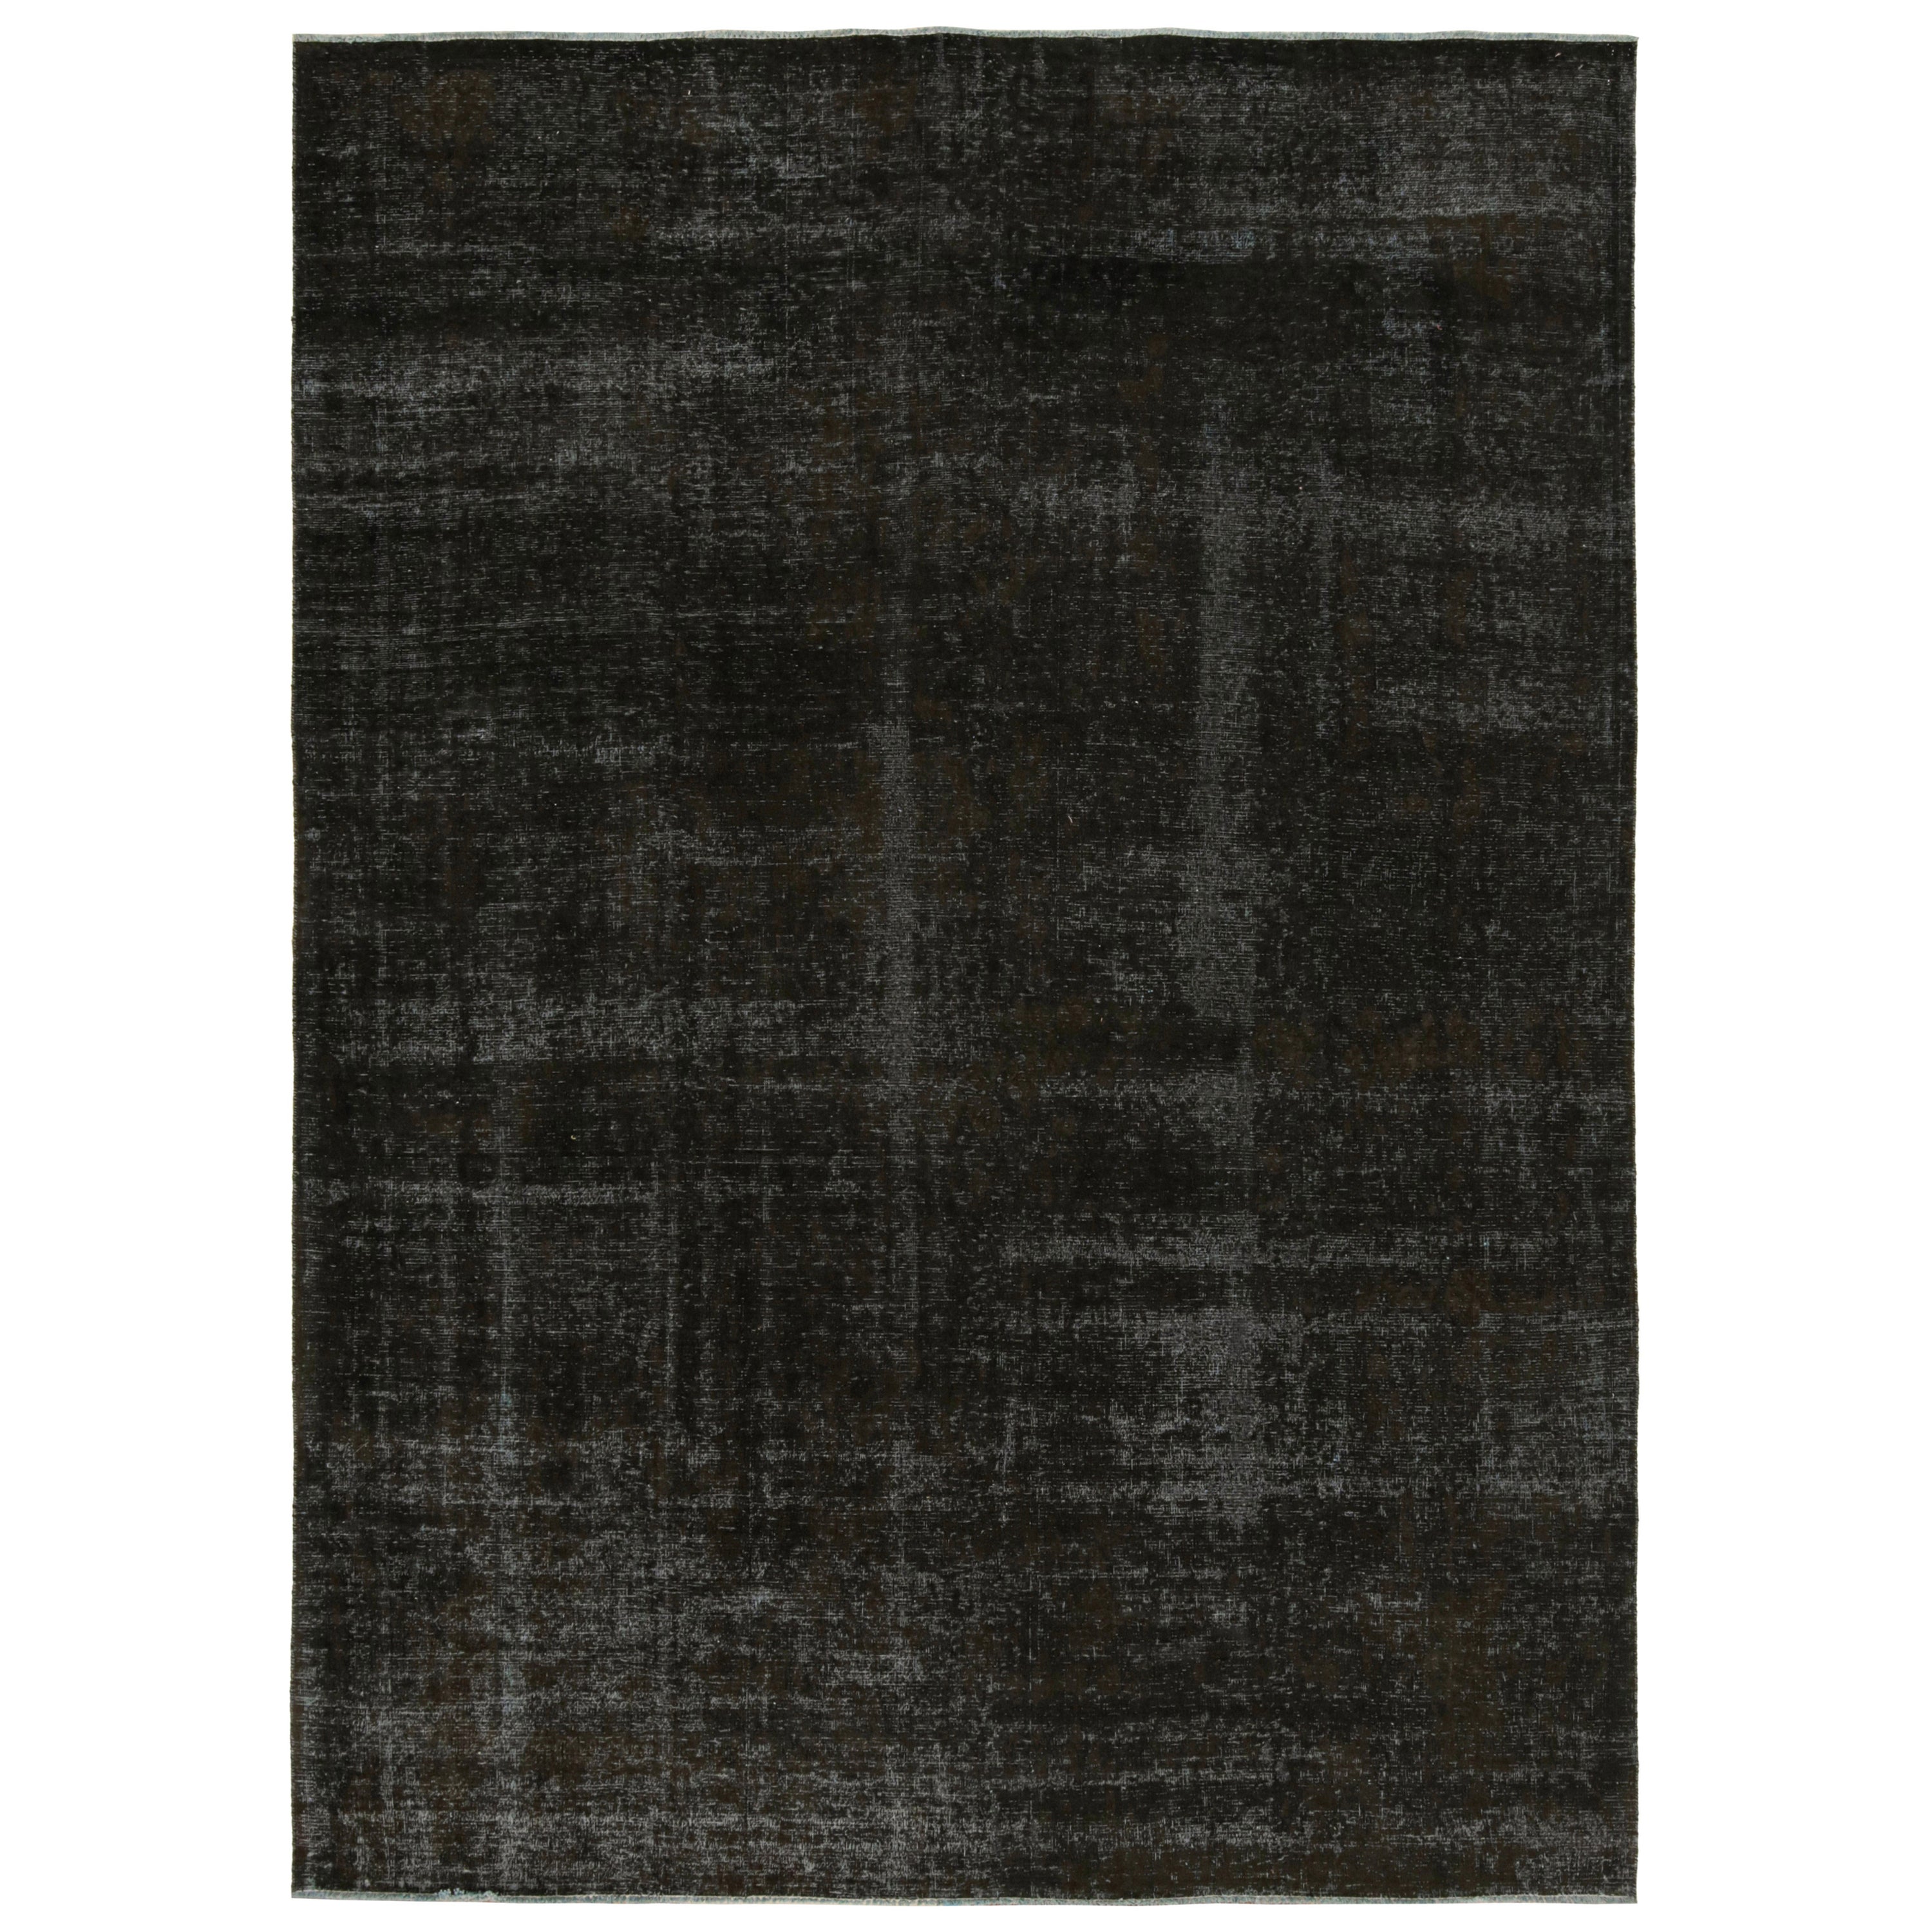 Vintage Persian Rug With Black and Brown Tones, From Rug & Kilim